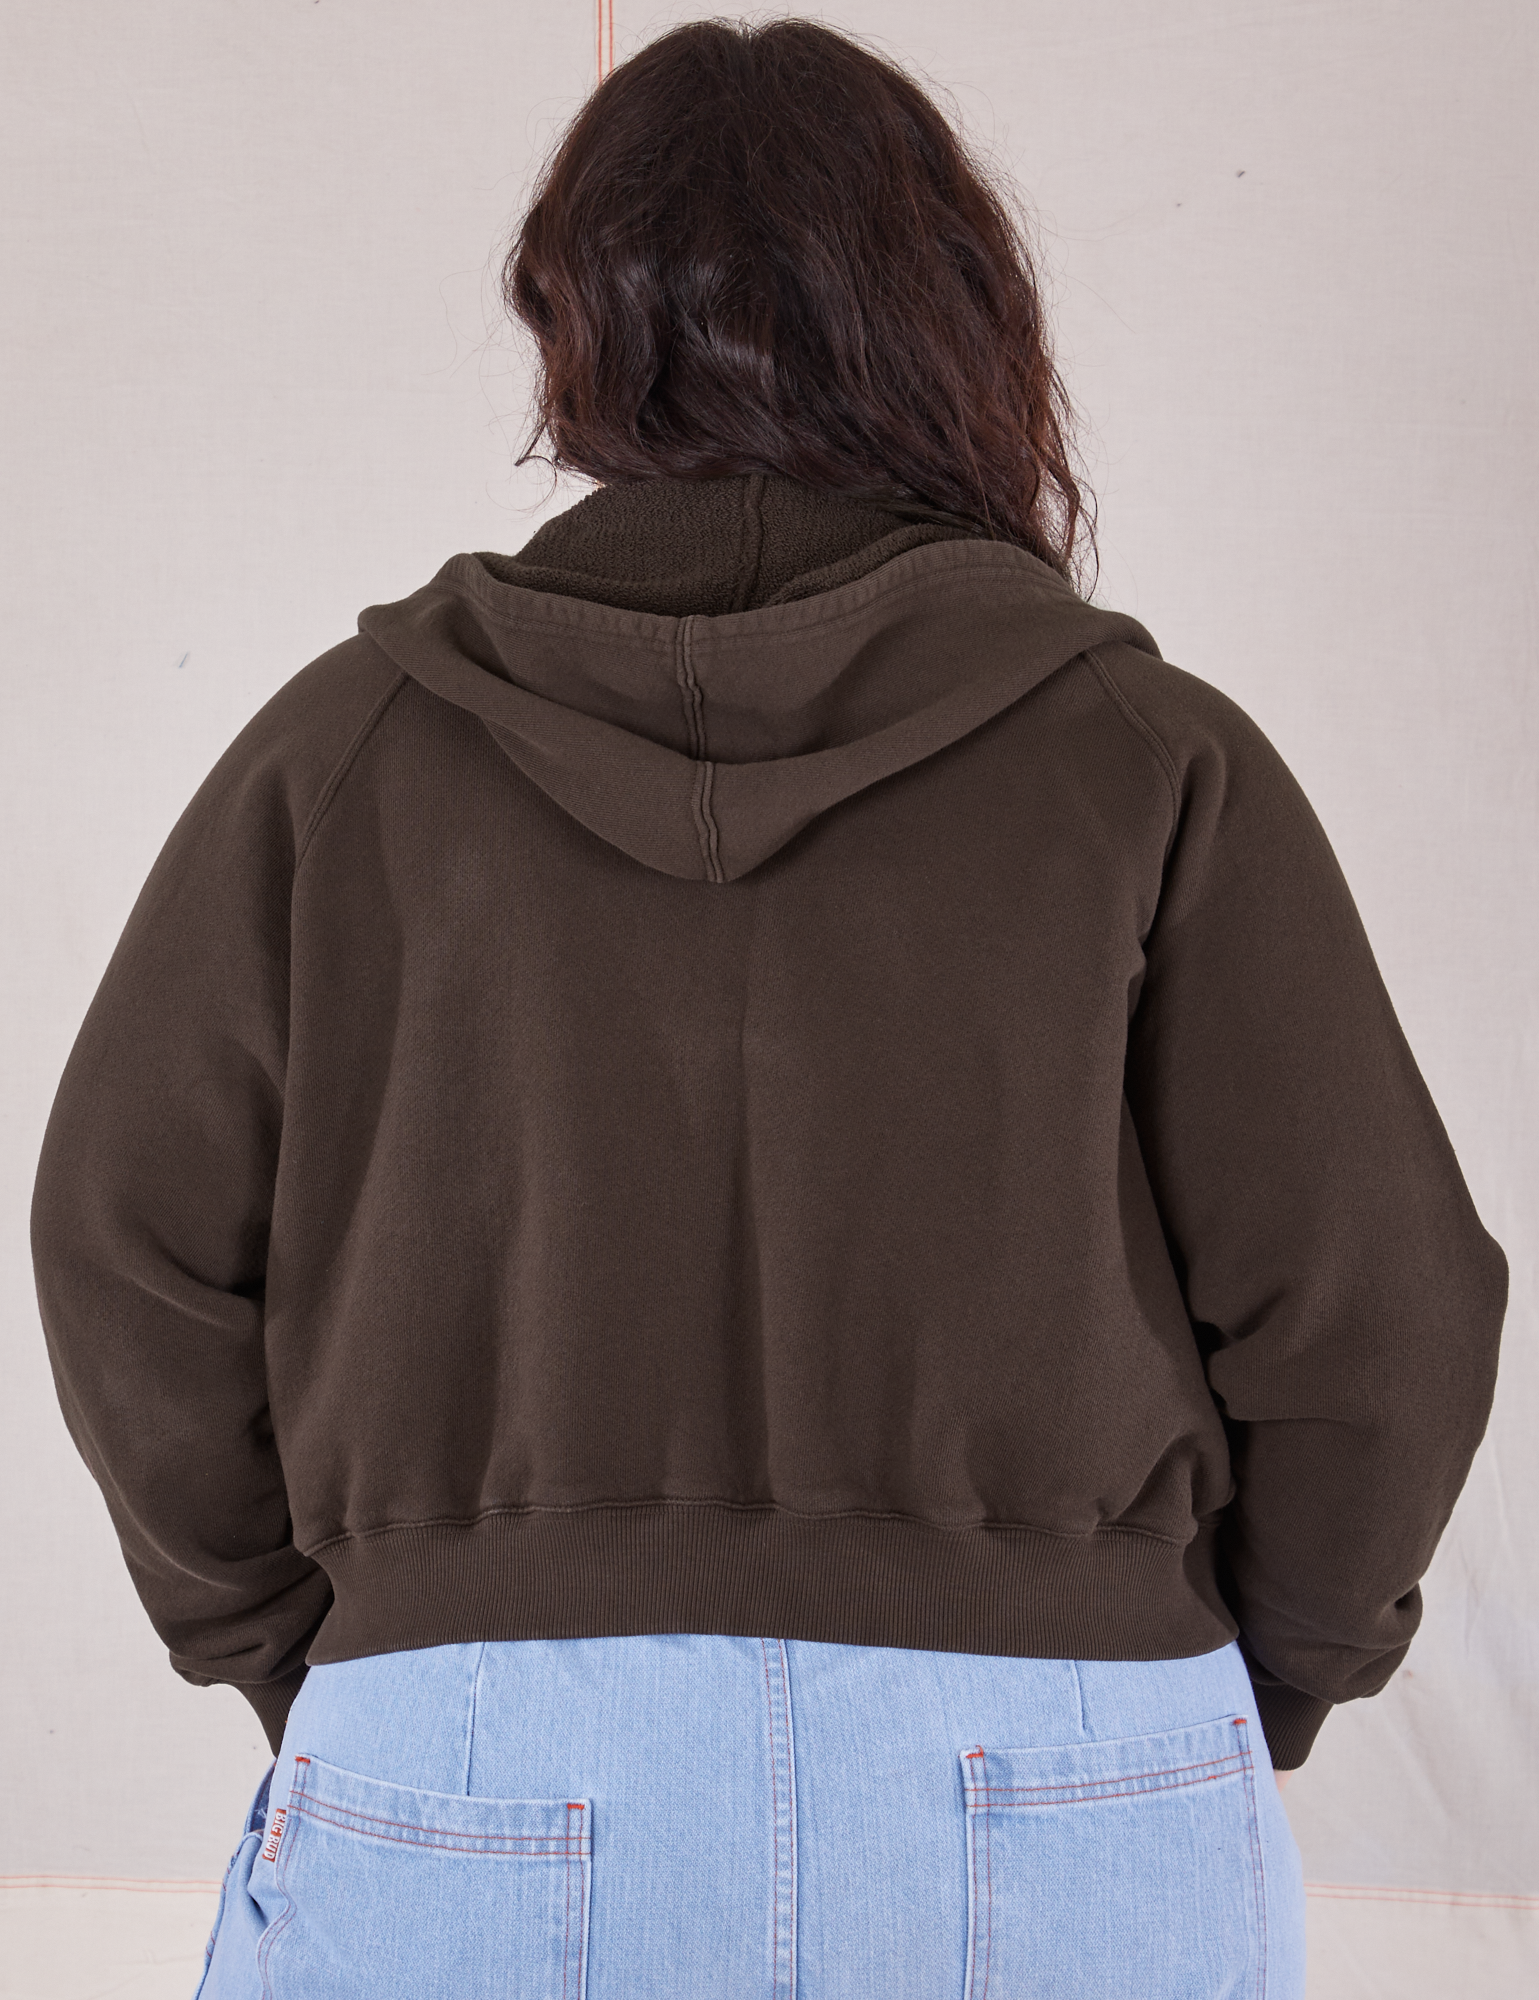 Cropped Zip Hoodie in Espresso Brown back view on Ashley